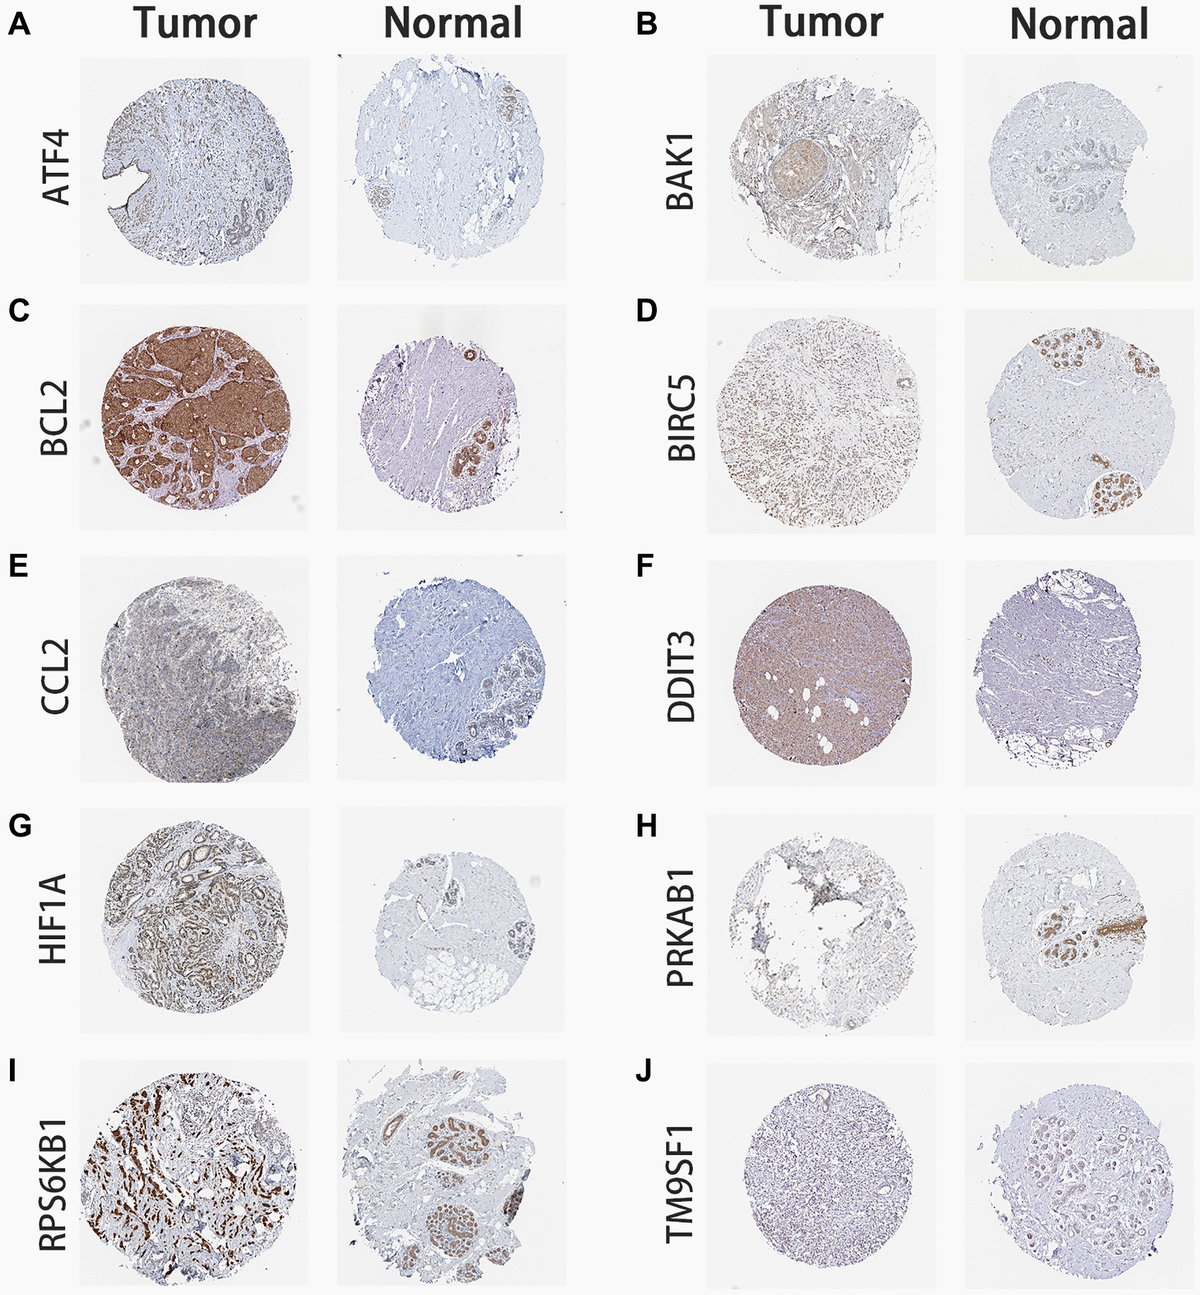 Immunohistochemistry of ARG expression. BC tumor and normal breast tissue images are shown for the signature’s ARG-coded proteins. (A) ATF4 expression. (B) BAK1 expression. (C) BCL2 expression. (D) BIRC5 expression. (E) CCL2 expression. (F) DDIT3 expression. (G) HIF1A expression. (H) PRKAB1 expression. (I) RPS6KB1 expression. (J) TM9SF1 expression. Images were obtained from the Human Protein Atlas database (<a href="https://www.proteinatlas.org/" target="